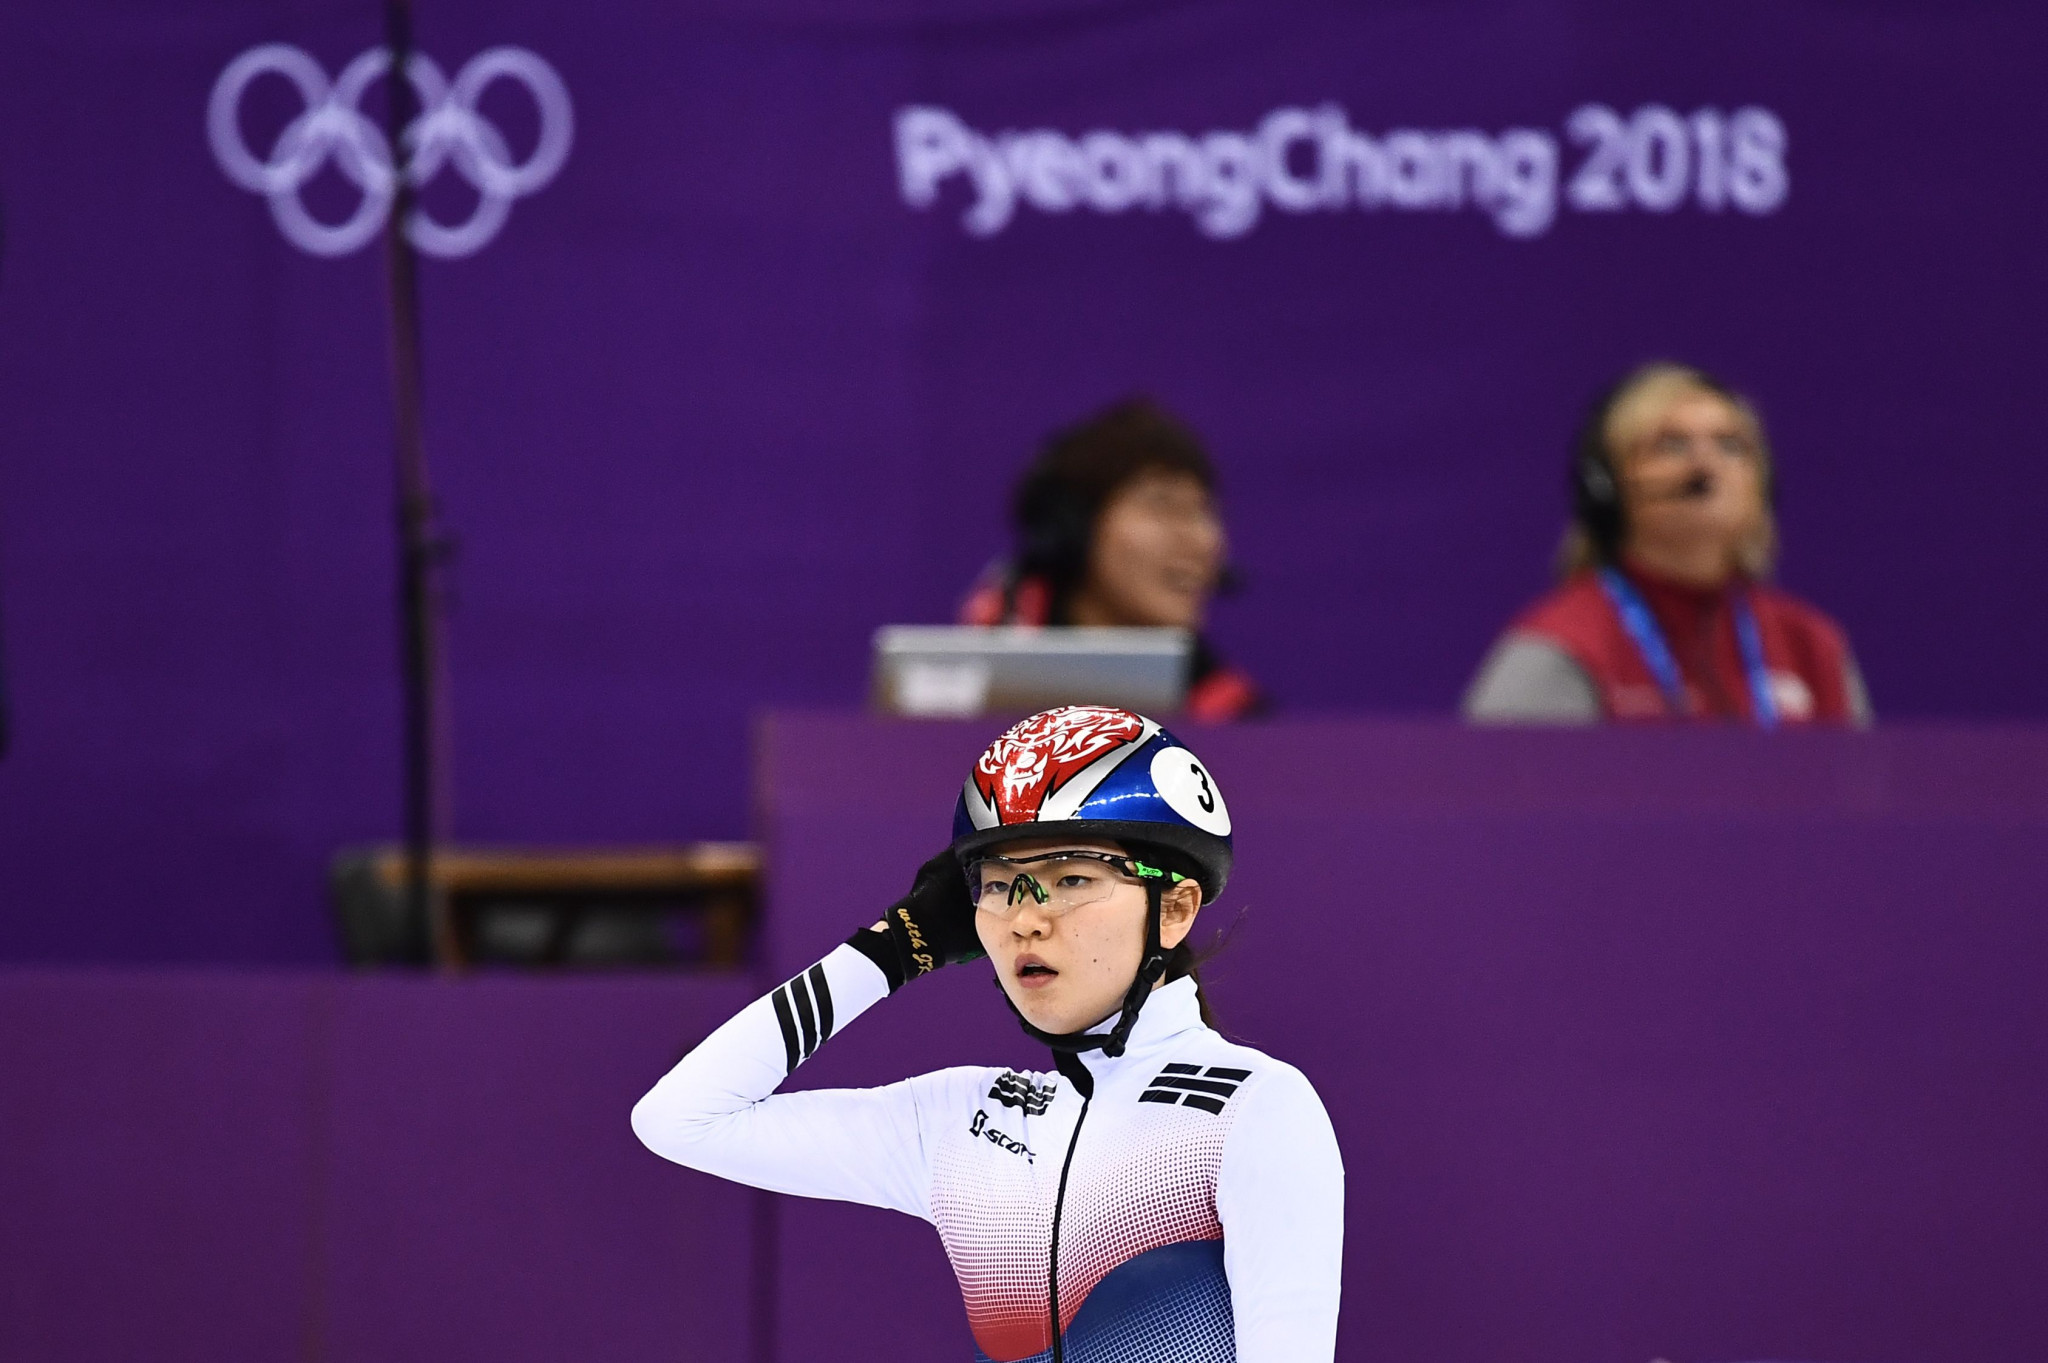 Pyeongchang 2018 champion Shim gives emotional testimony during appeals trial of former skating coach